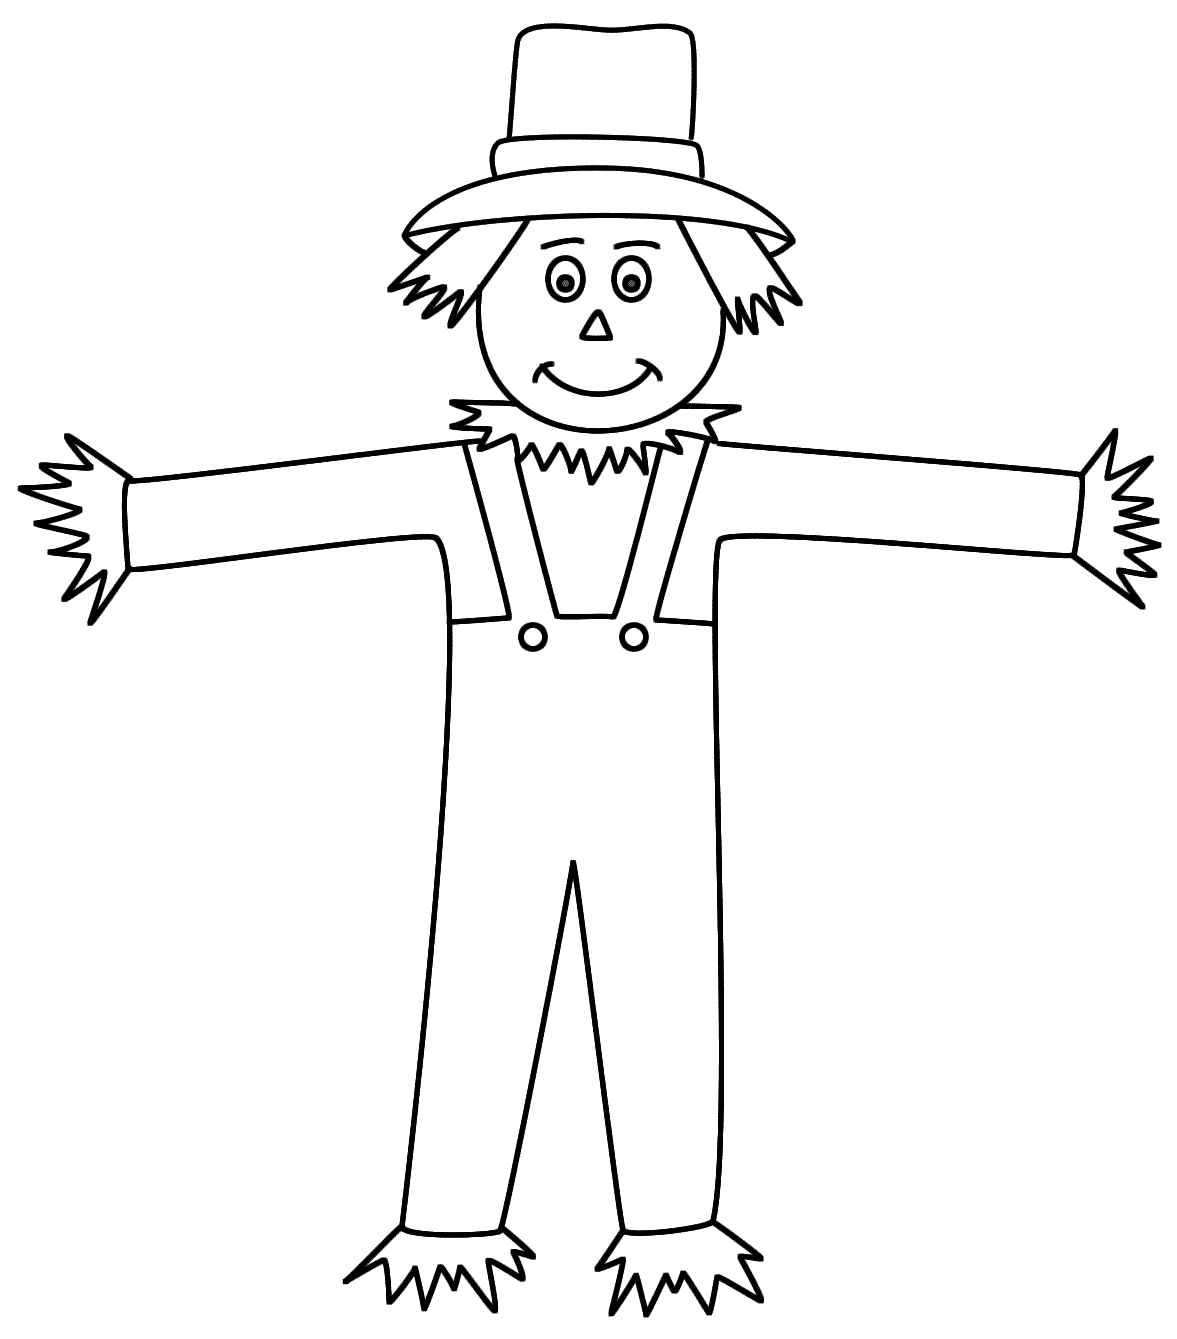 scarecrow-coloring-page-clip-art-library